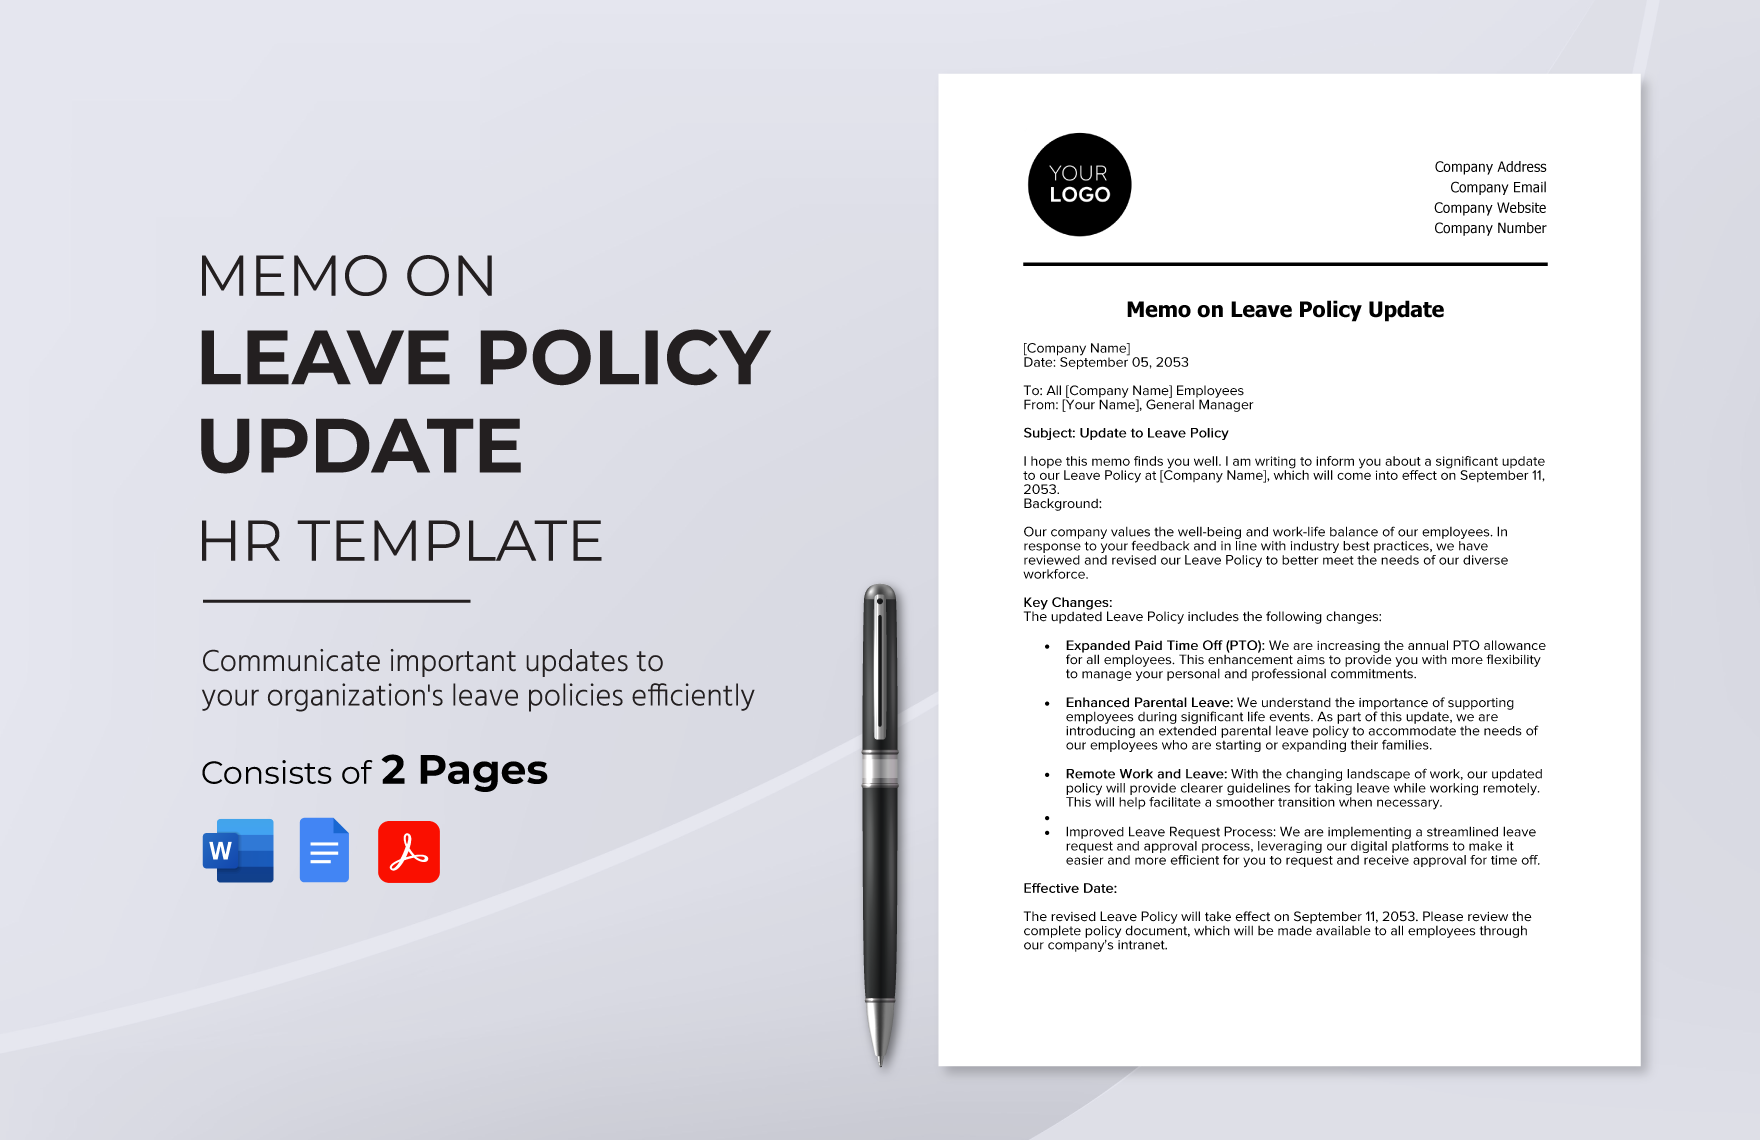 Memo on Leave Policy Update HR Template